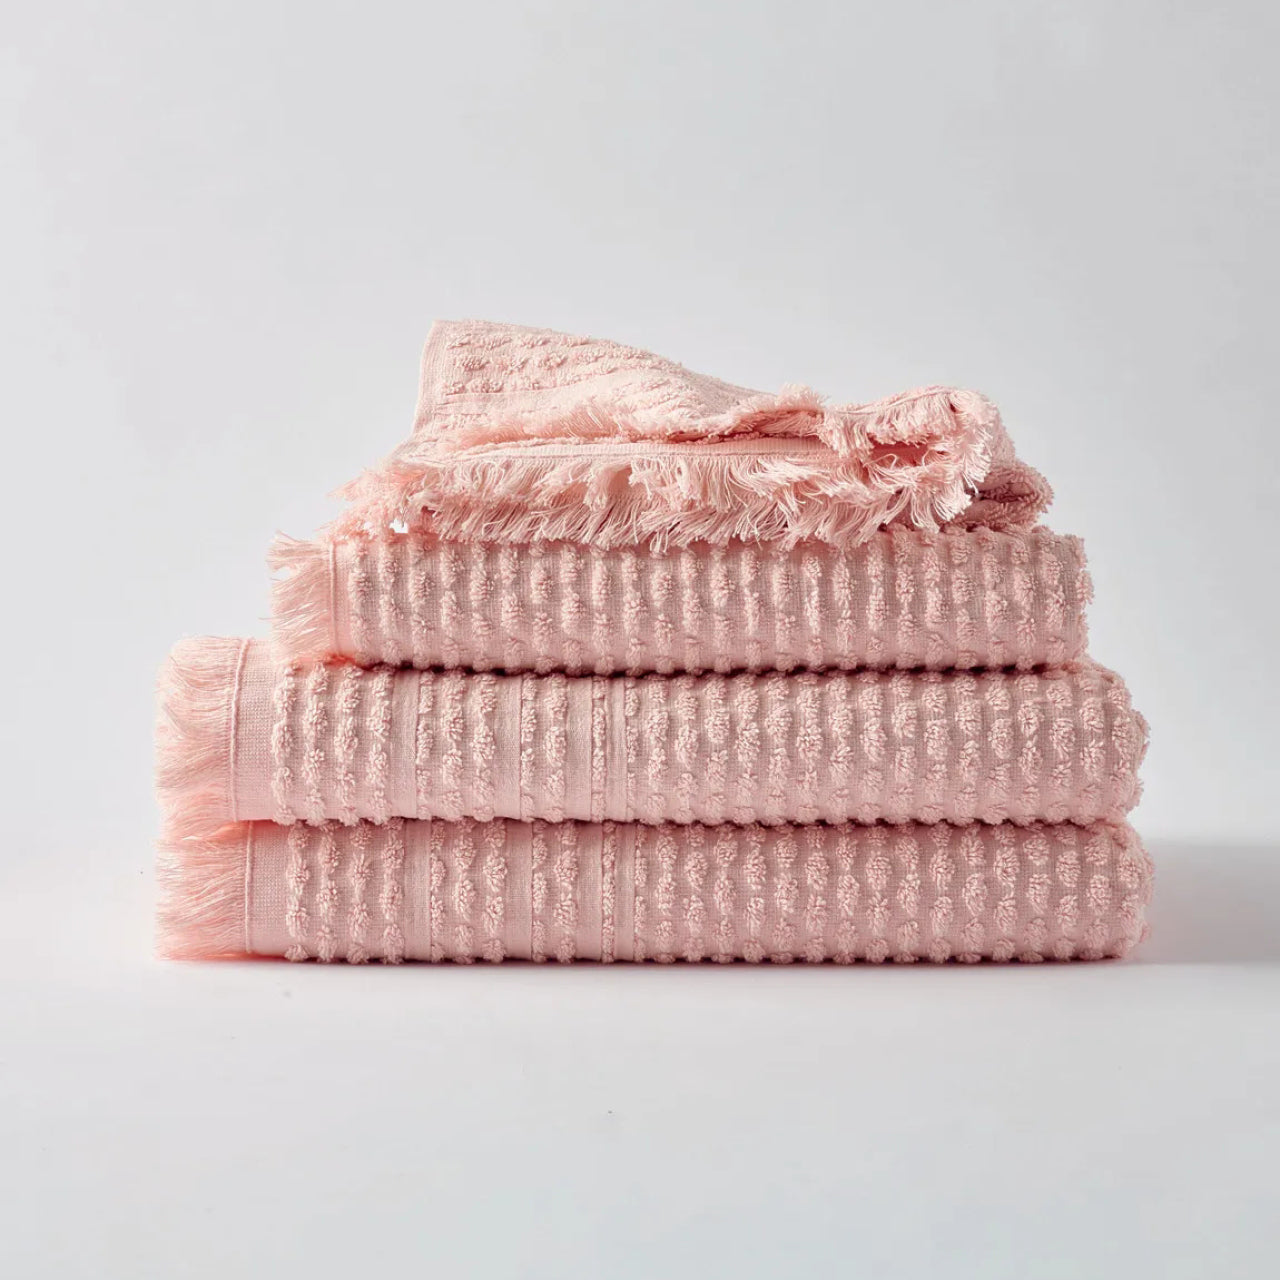 Group shot of Emine Towels Rose stacked